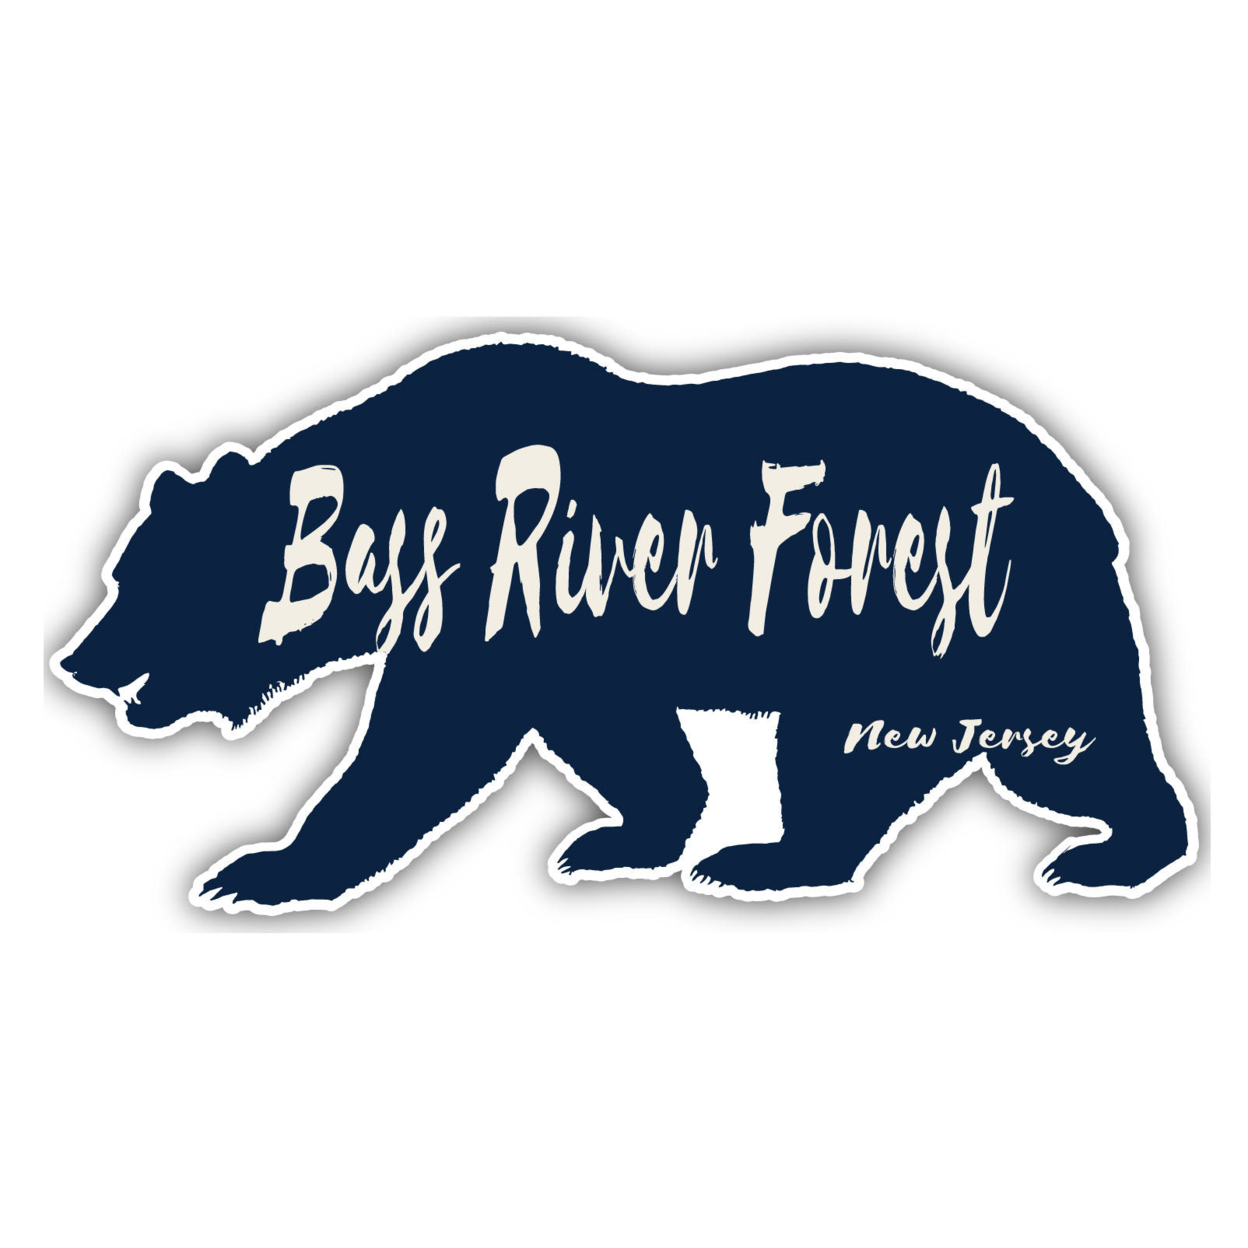 Bass River Forest New Jersey Souvenir Decorative Stickers (Choose Theme And Size) - Single Unit, 6-Inch, Bear